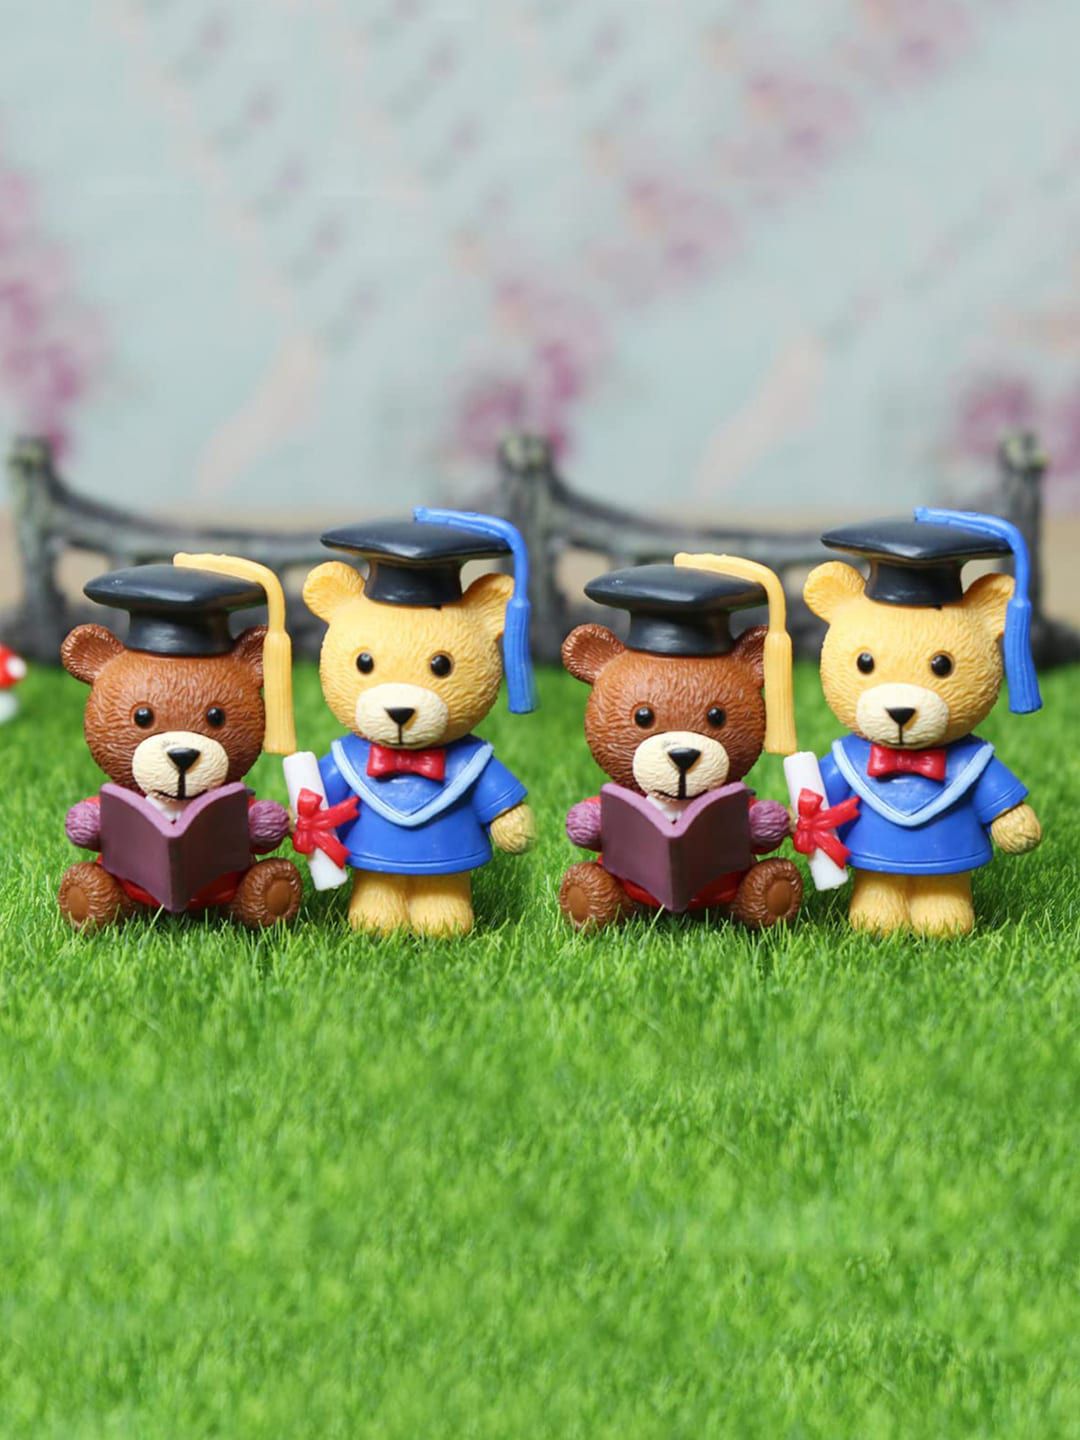 Wonderland Set Of 4 Brown Student Teddy Miniature Toys Garden Accessory Price in India